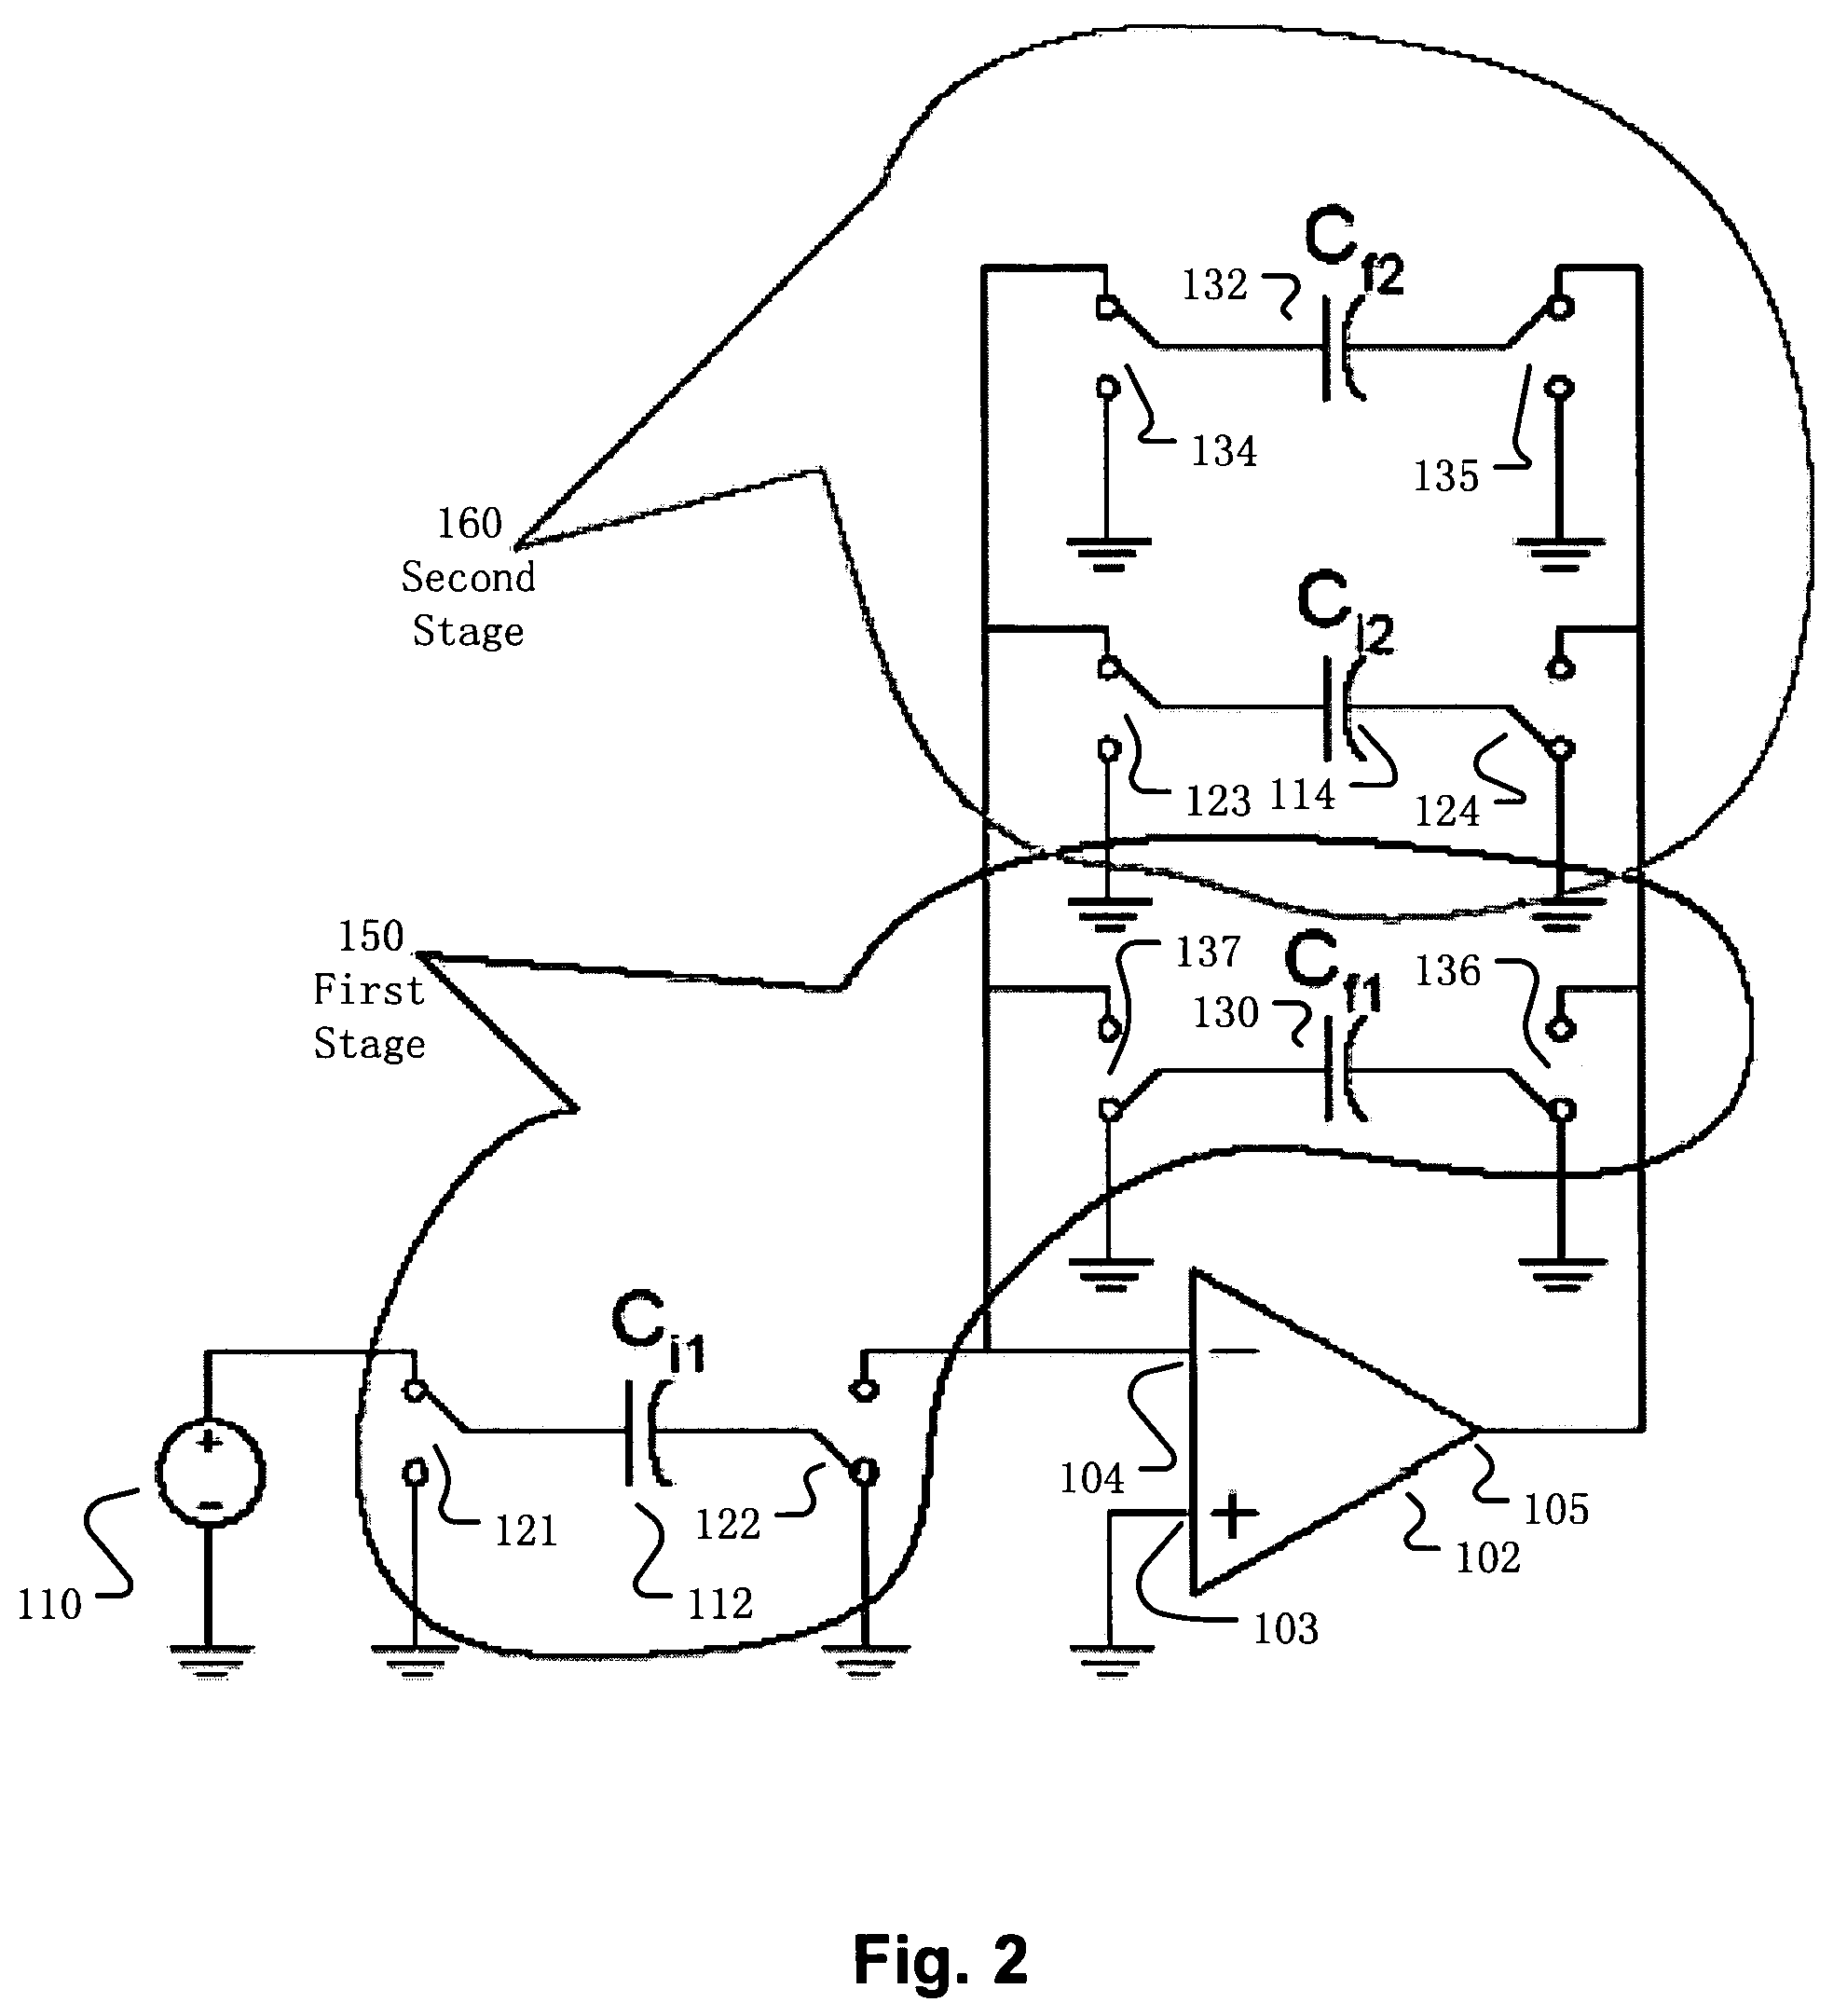 Multi-stage amplifier with switching circuitry